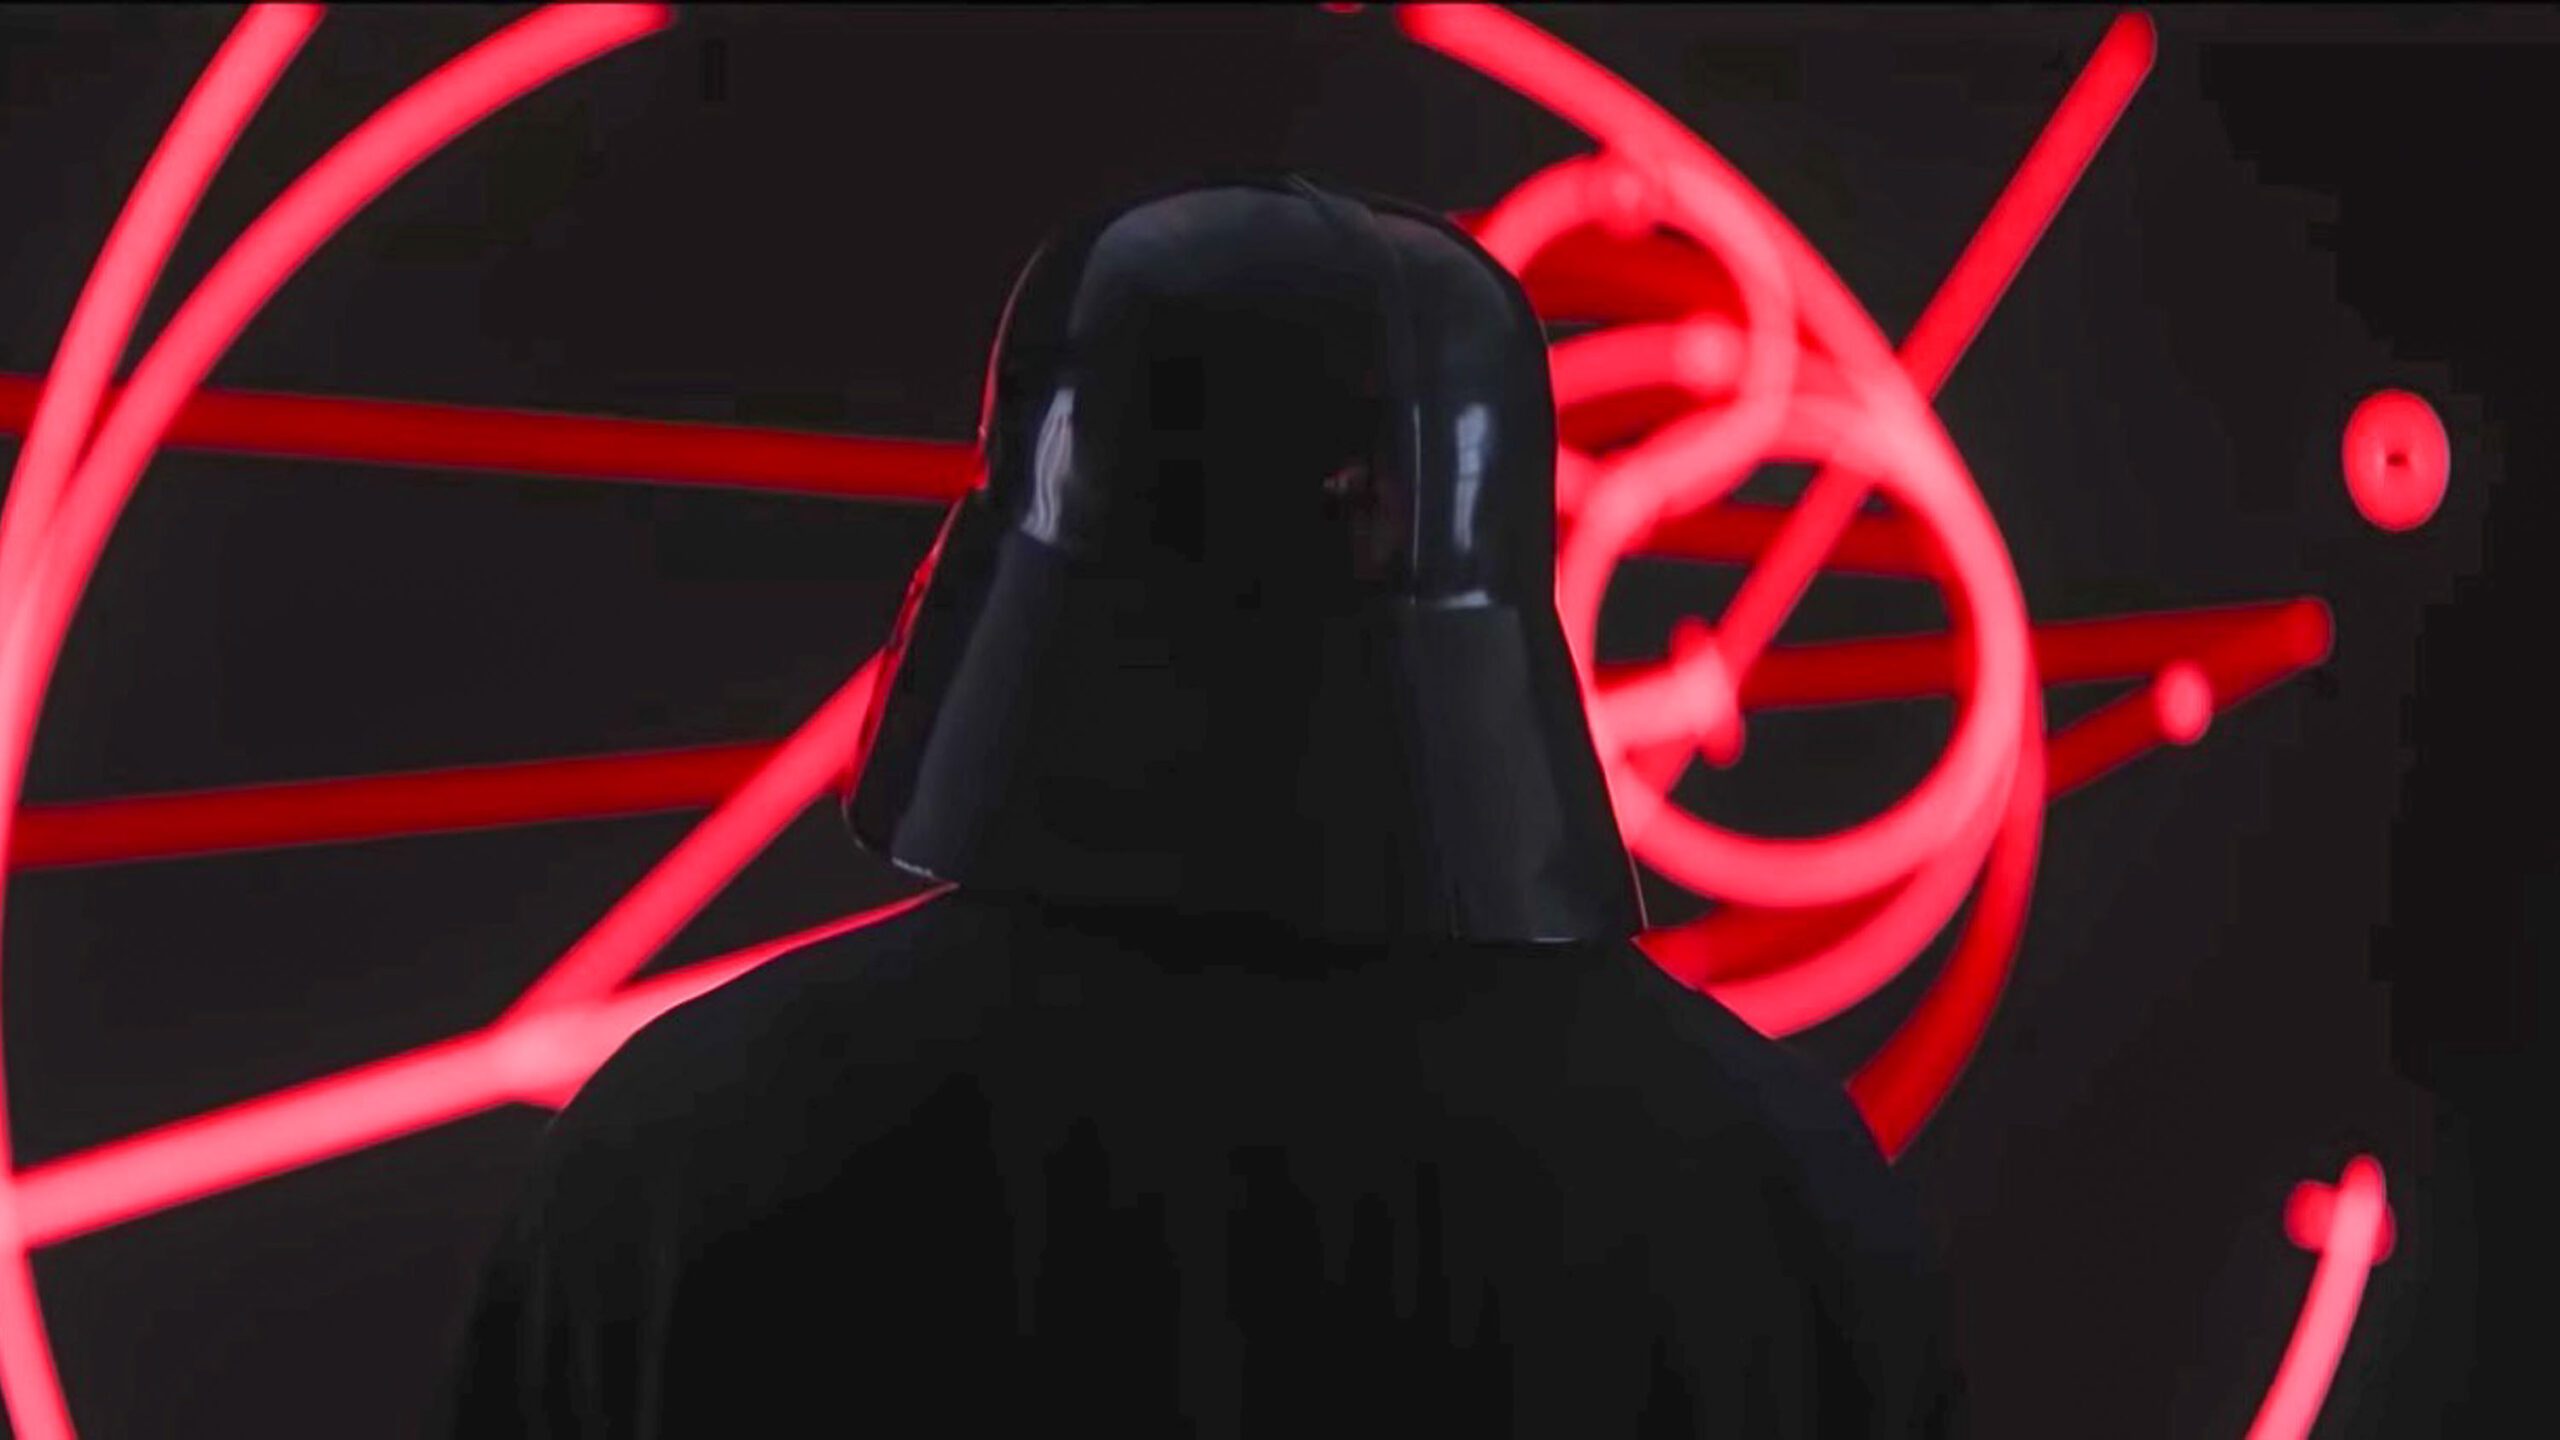 WATCH: Donnie Yen, Darth Vader, and more shine in new ‘Rogue One’ trailer